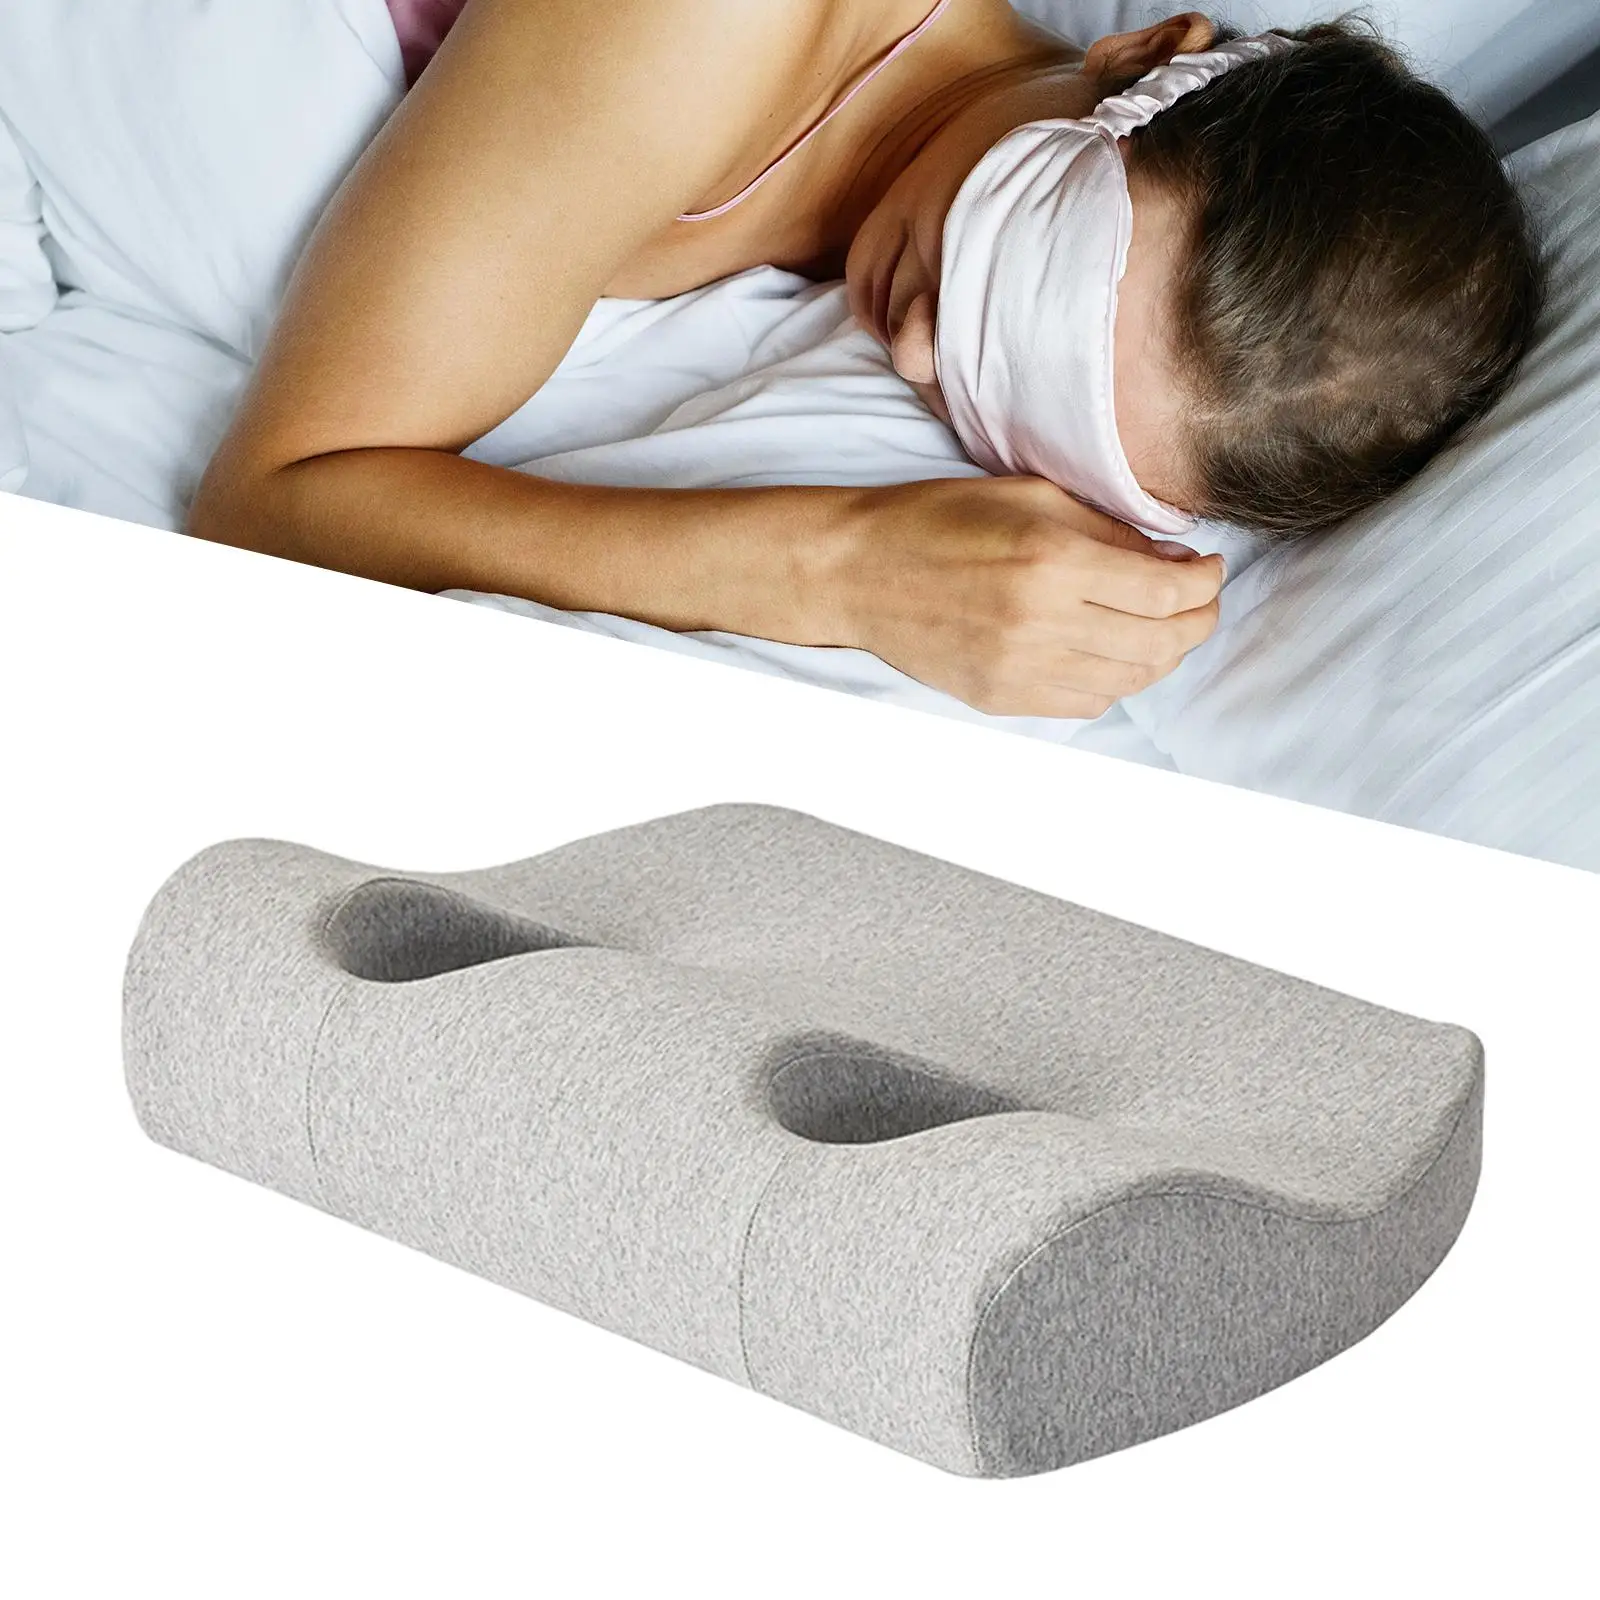 Pillow with Ear Hole Soft Pillows with Hole Side Sleeping Pillow for Ear Pain Earbuds Side Sleepers Stomach Sleeping Earplugs